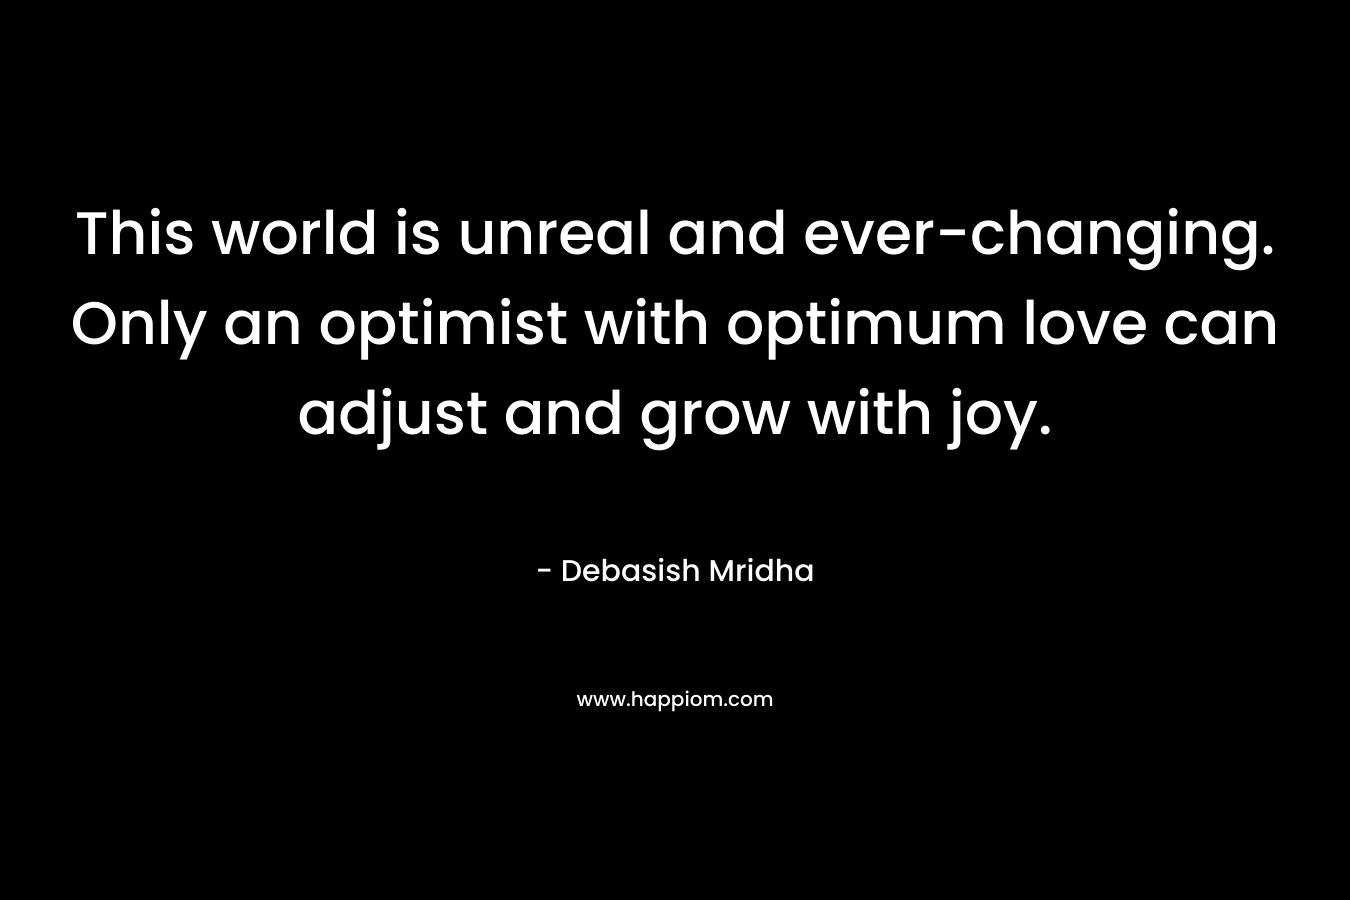 This world is unreal and ever-changing. Only an optimist with optimum love can adjust and grow with joy. – Debasish Mridha